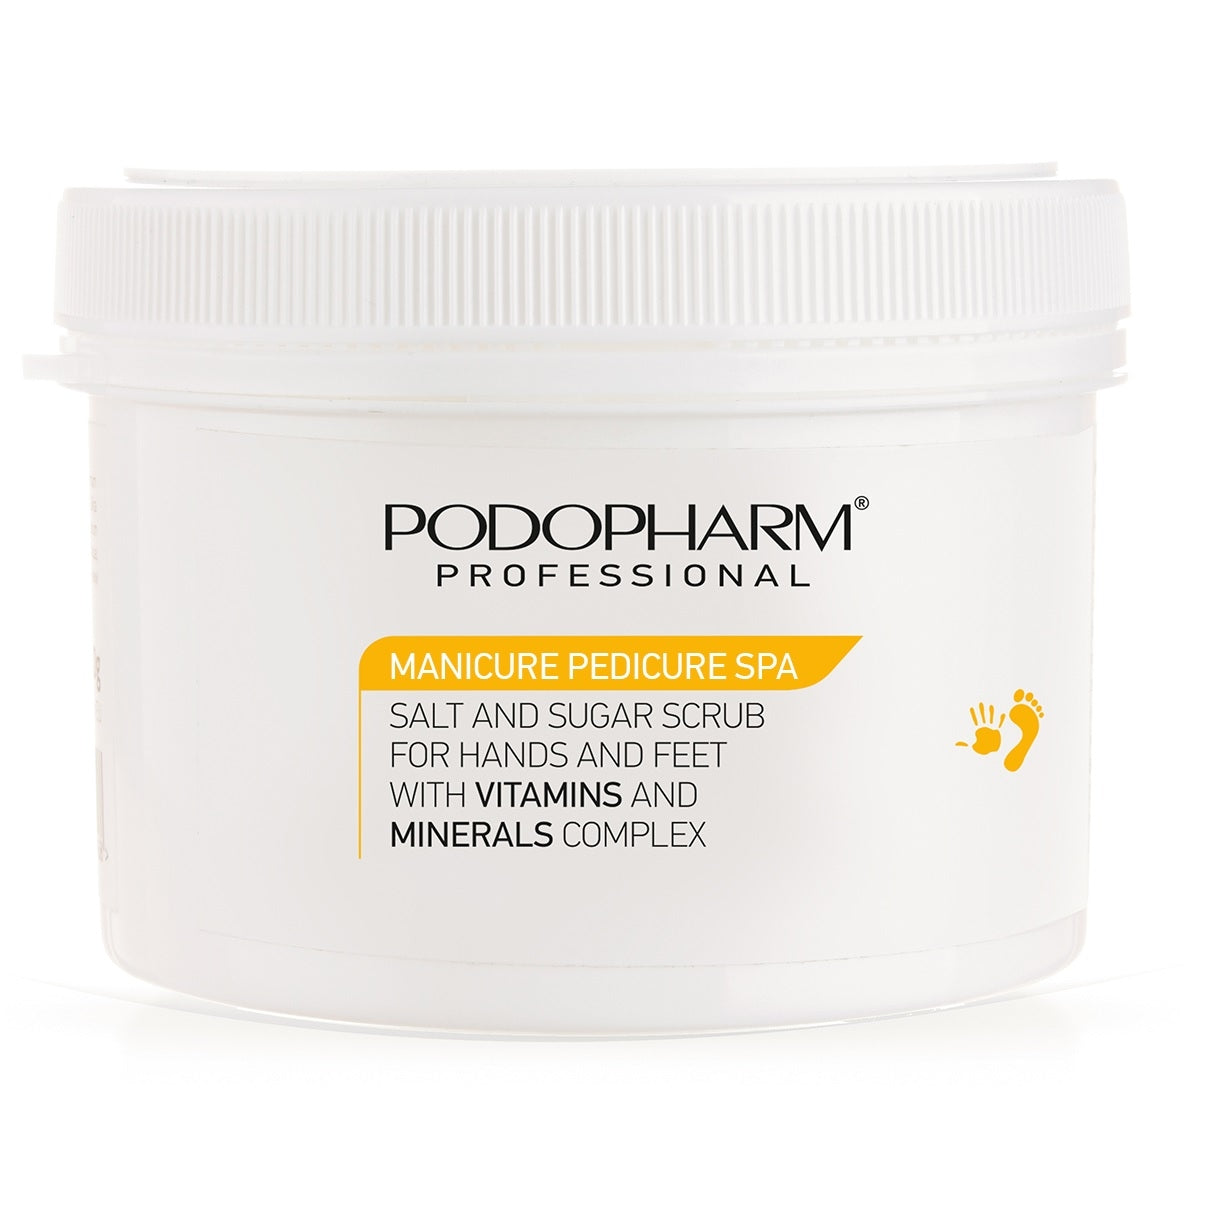 Podopharm Professional Salt And Sugar Scrub For Hands And Feet With Vitamins And Minerals 600g Podopharm